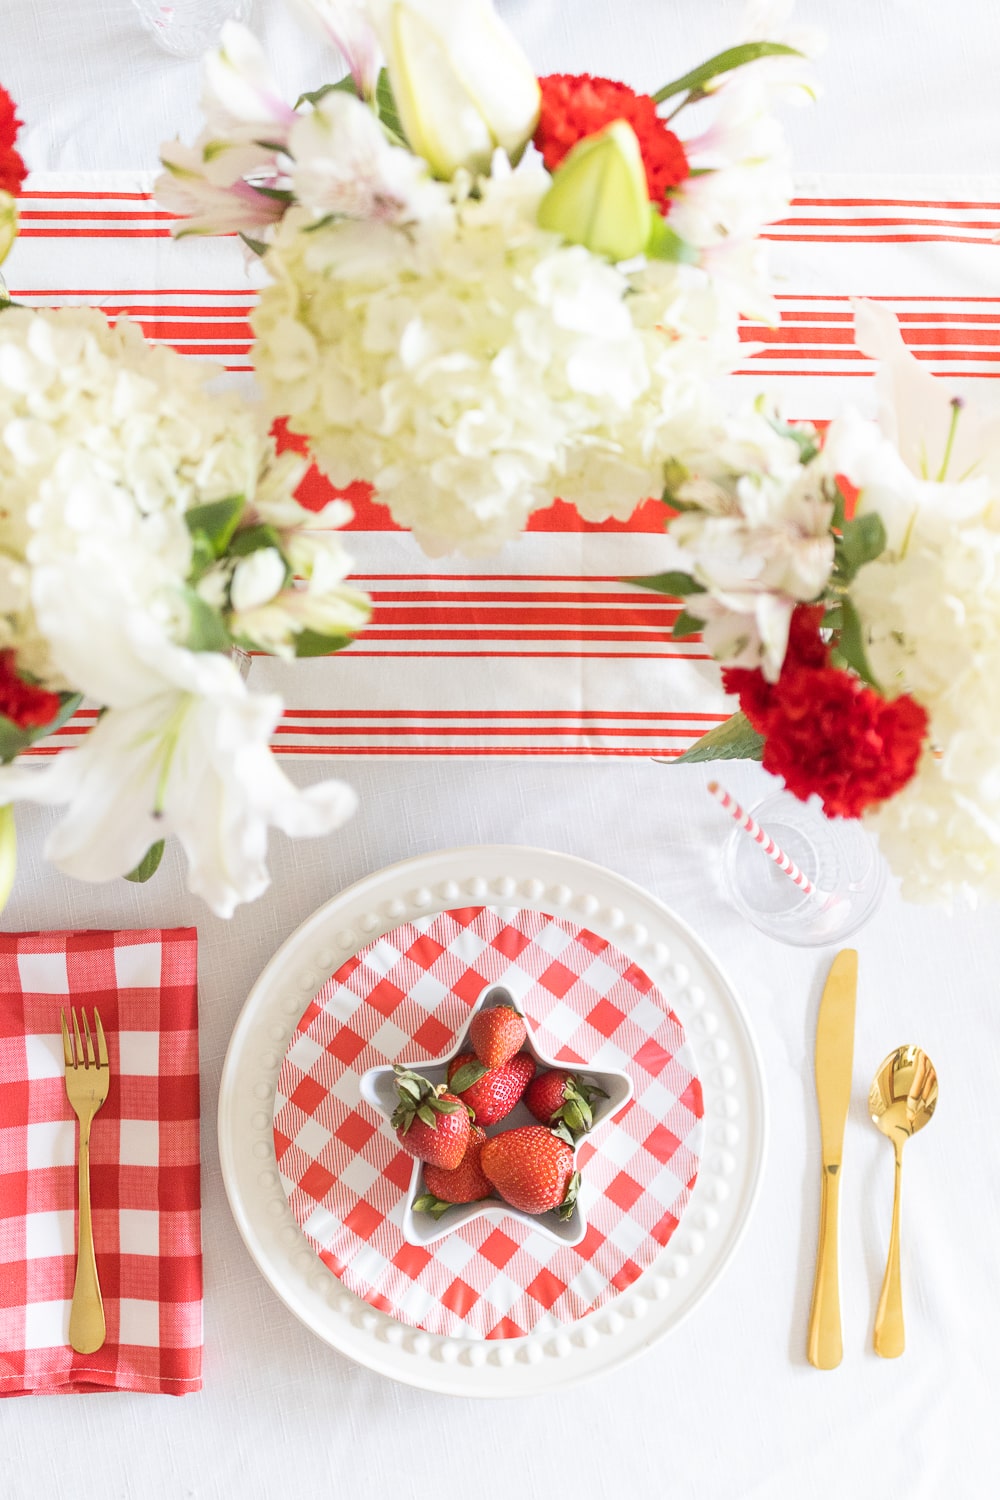 Blogger Stephanie Ziajka shares ideas for Memorial Day and 4th of July table settings on Diary of a Debutante